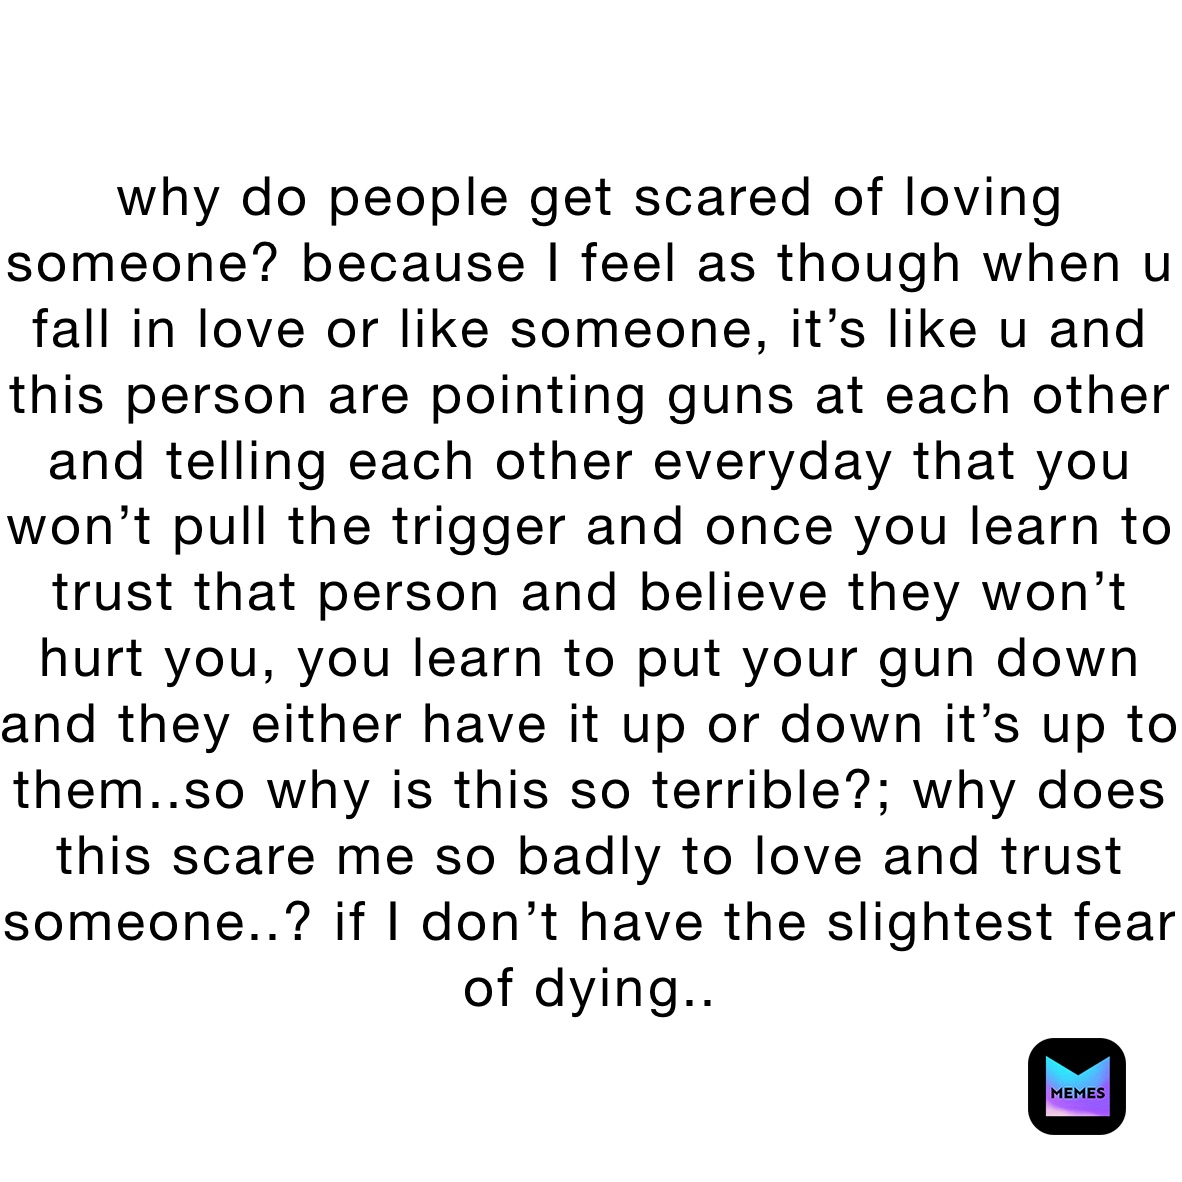 why do people get scared of loving someone? because I feel as though when u fall in love or like someone, it’s like u and this person are pointing guns at each other and telling each other everyday that you won’t pull the trigger and once you learn to trust that person and believe they won’t hurt you, you learn to put your gun down and they either have it up or down it’s up to them..so why is this so terrible?; why does this scare me so badly to love and trust someone..? if I don’t have the slightest fear of dying..